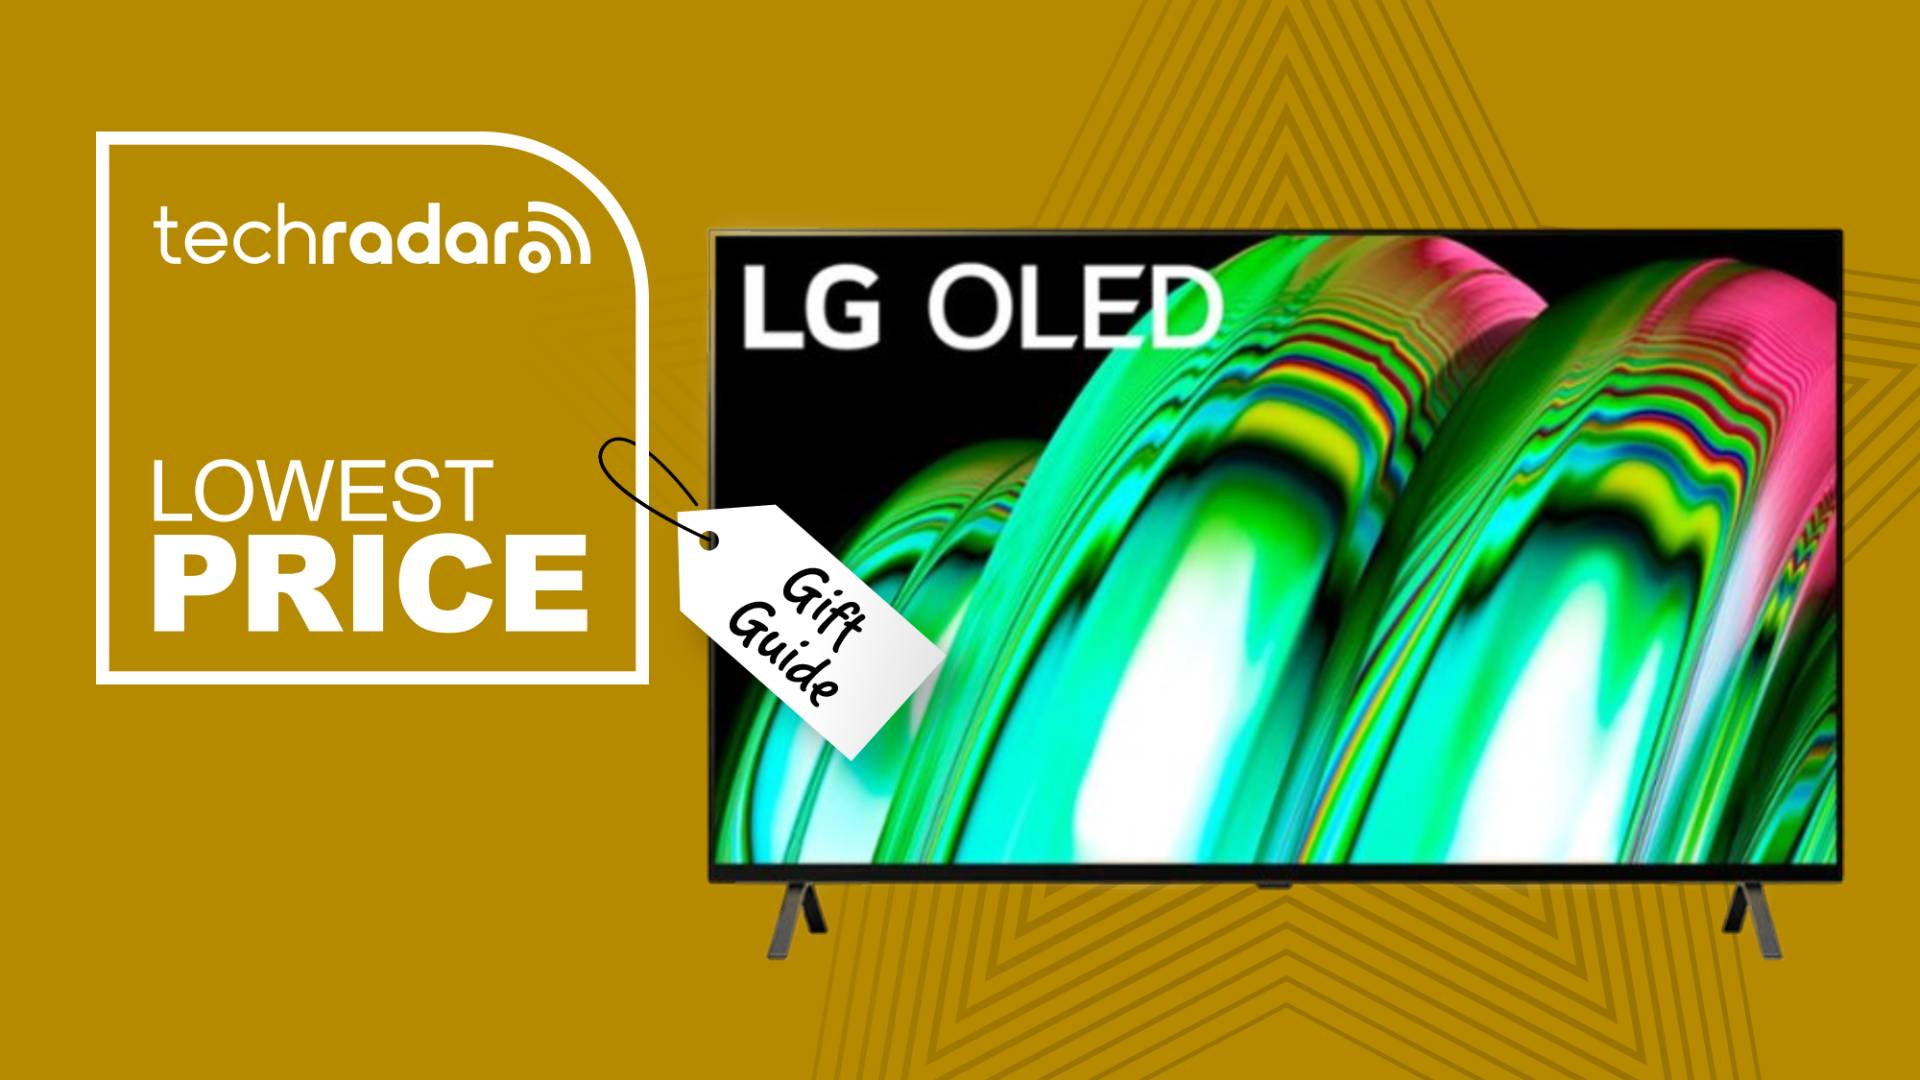 An LG OLED TV for under $600? This holiday deal is really happening ...